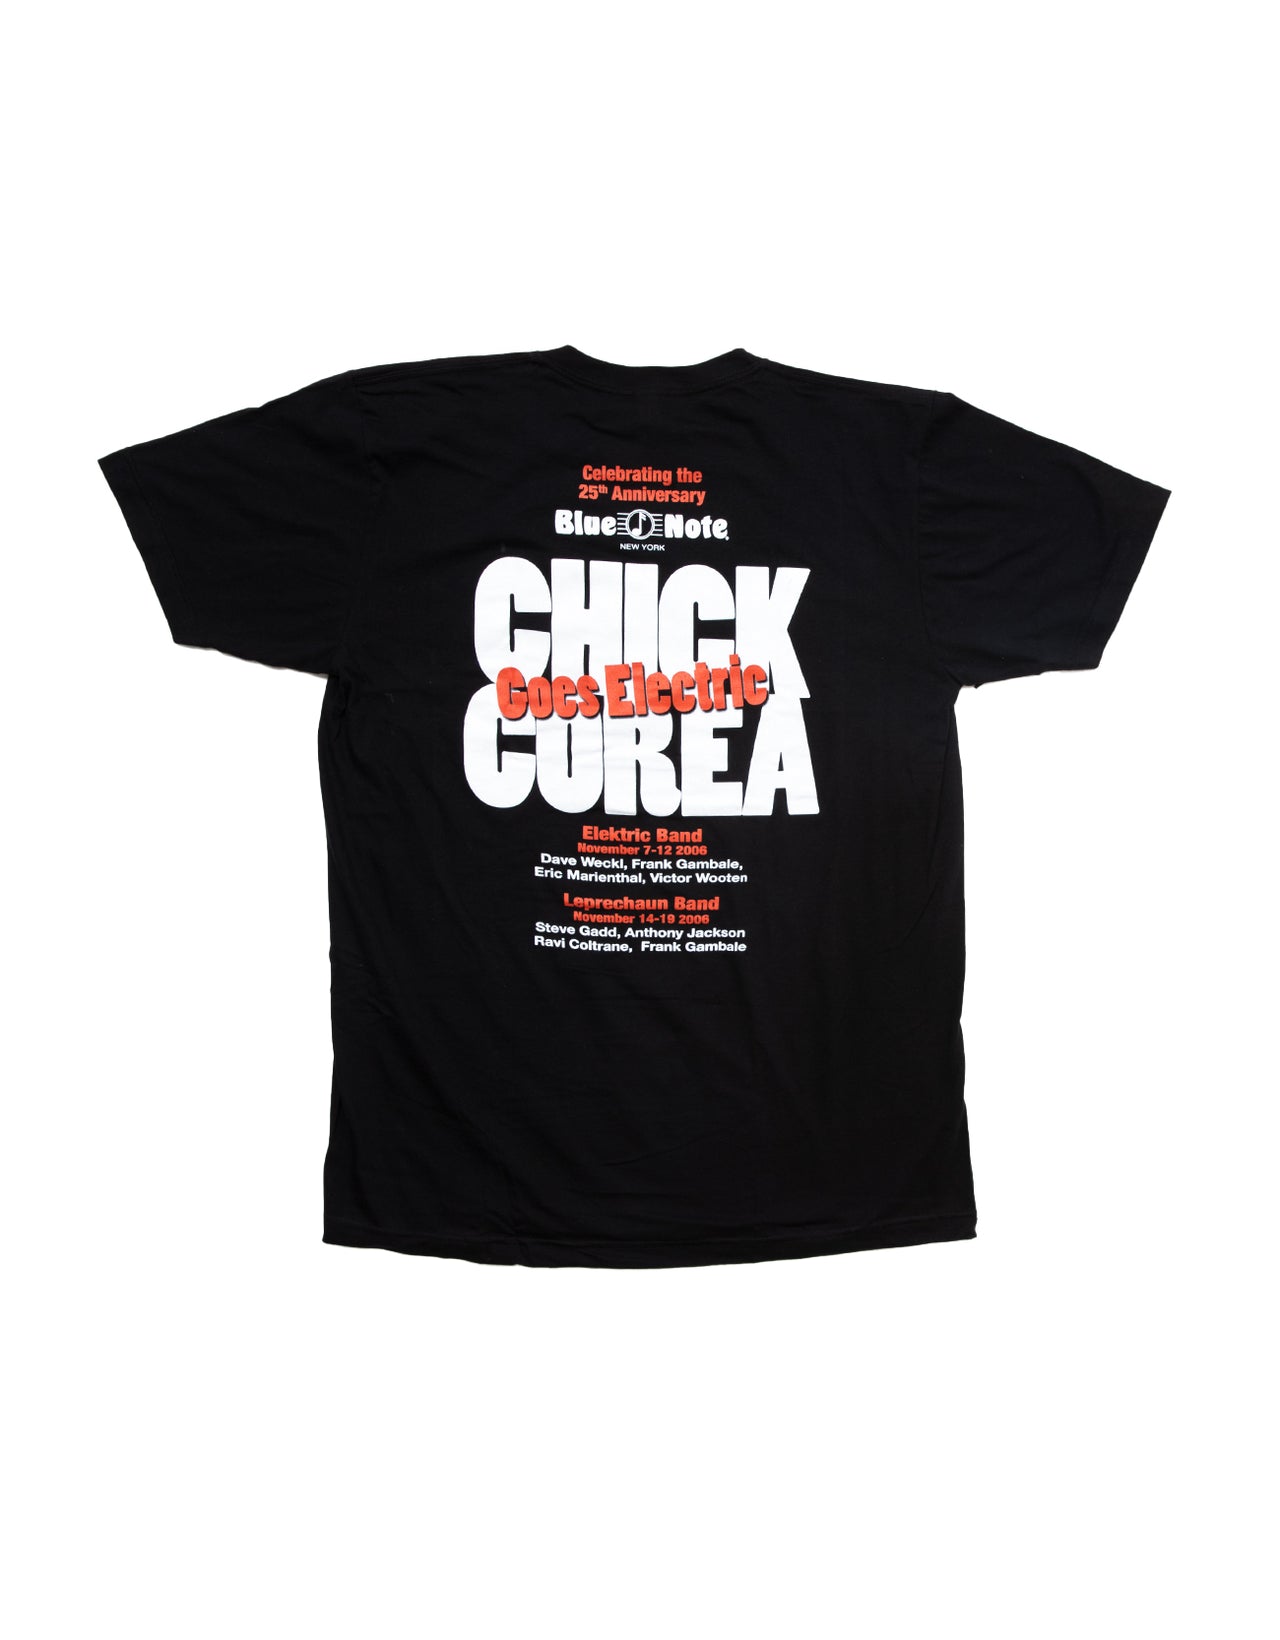 Chick Corea goes electric Tee